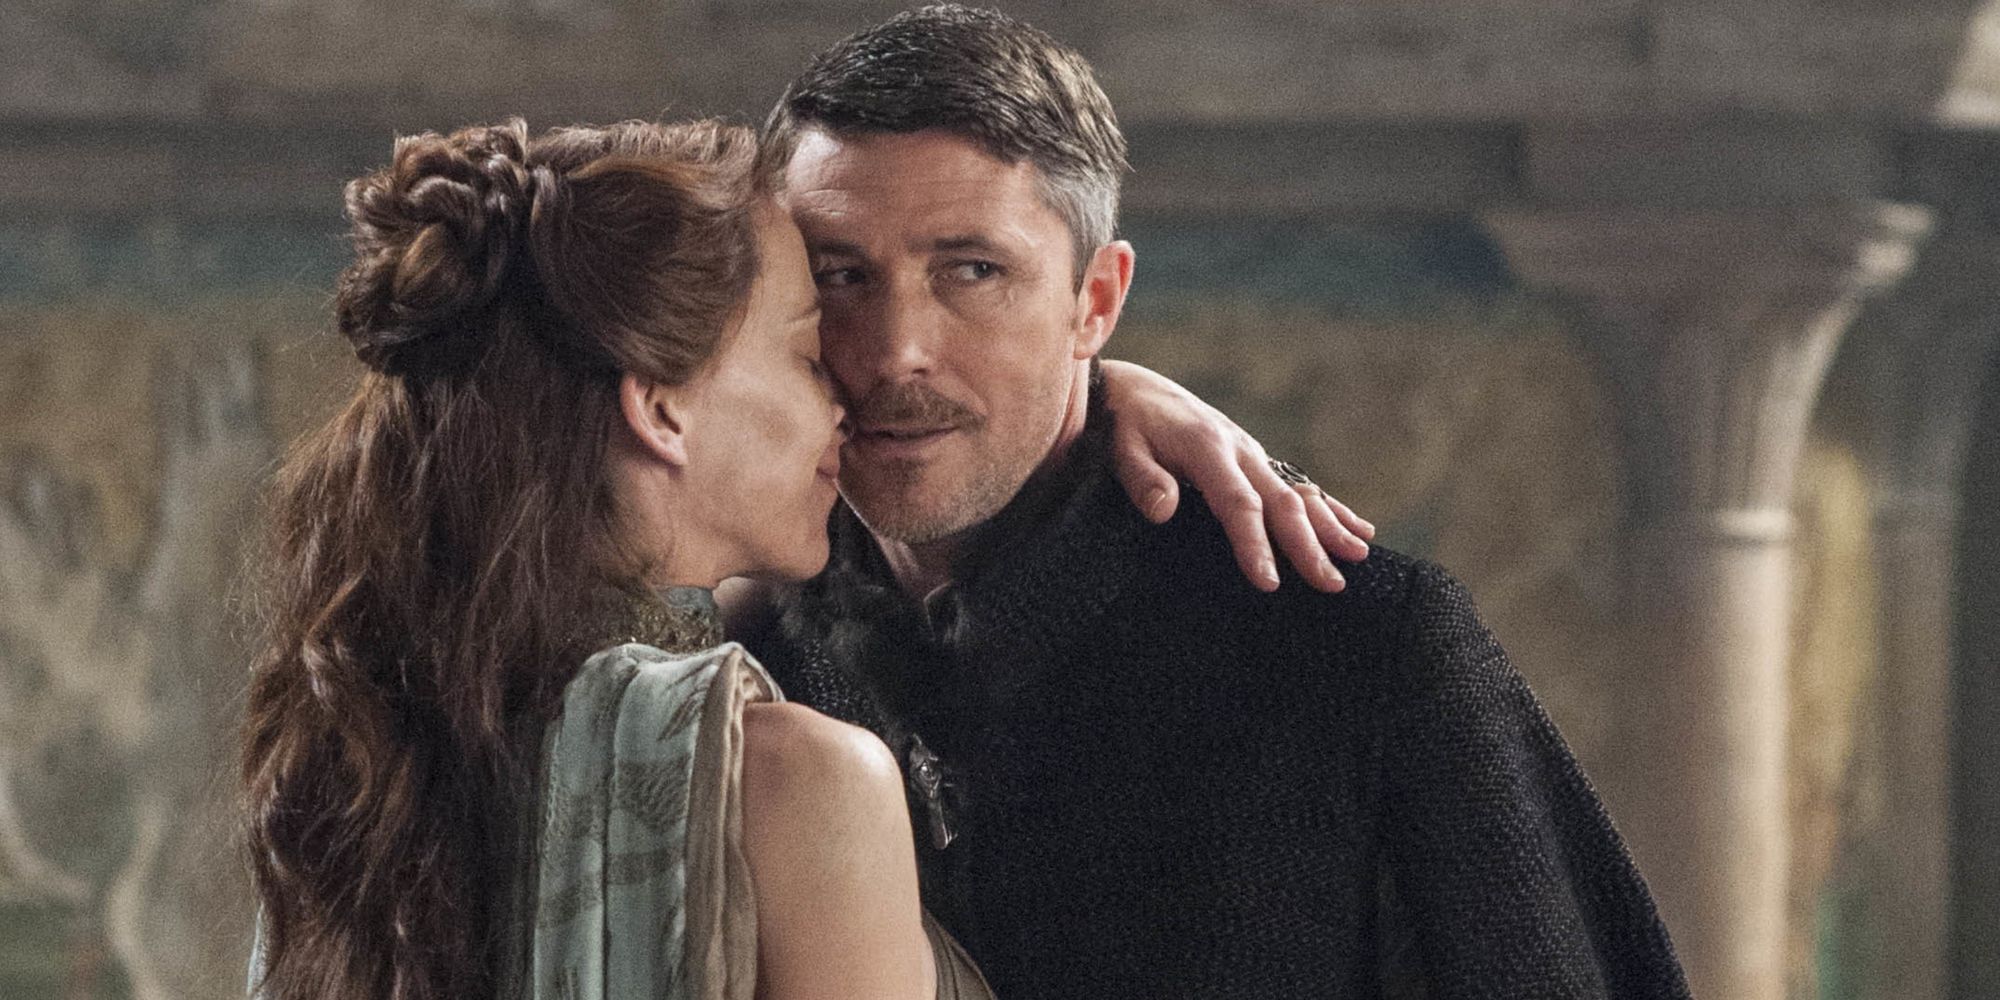 Littlefinger and Lysa Arryn hugging in Game of Thrones